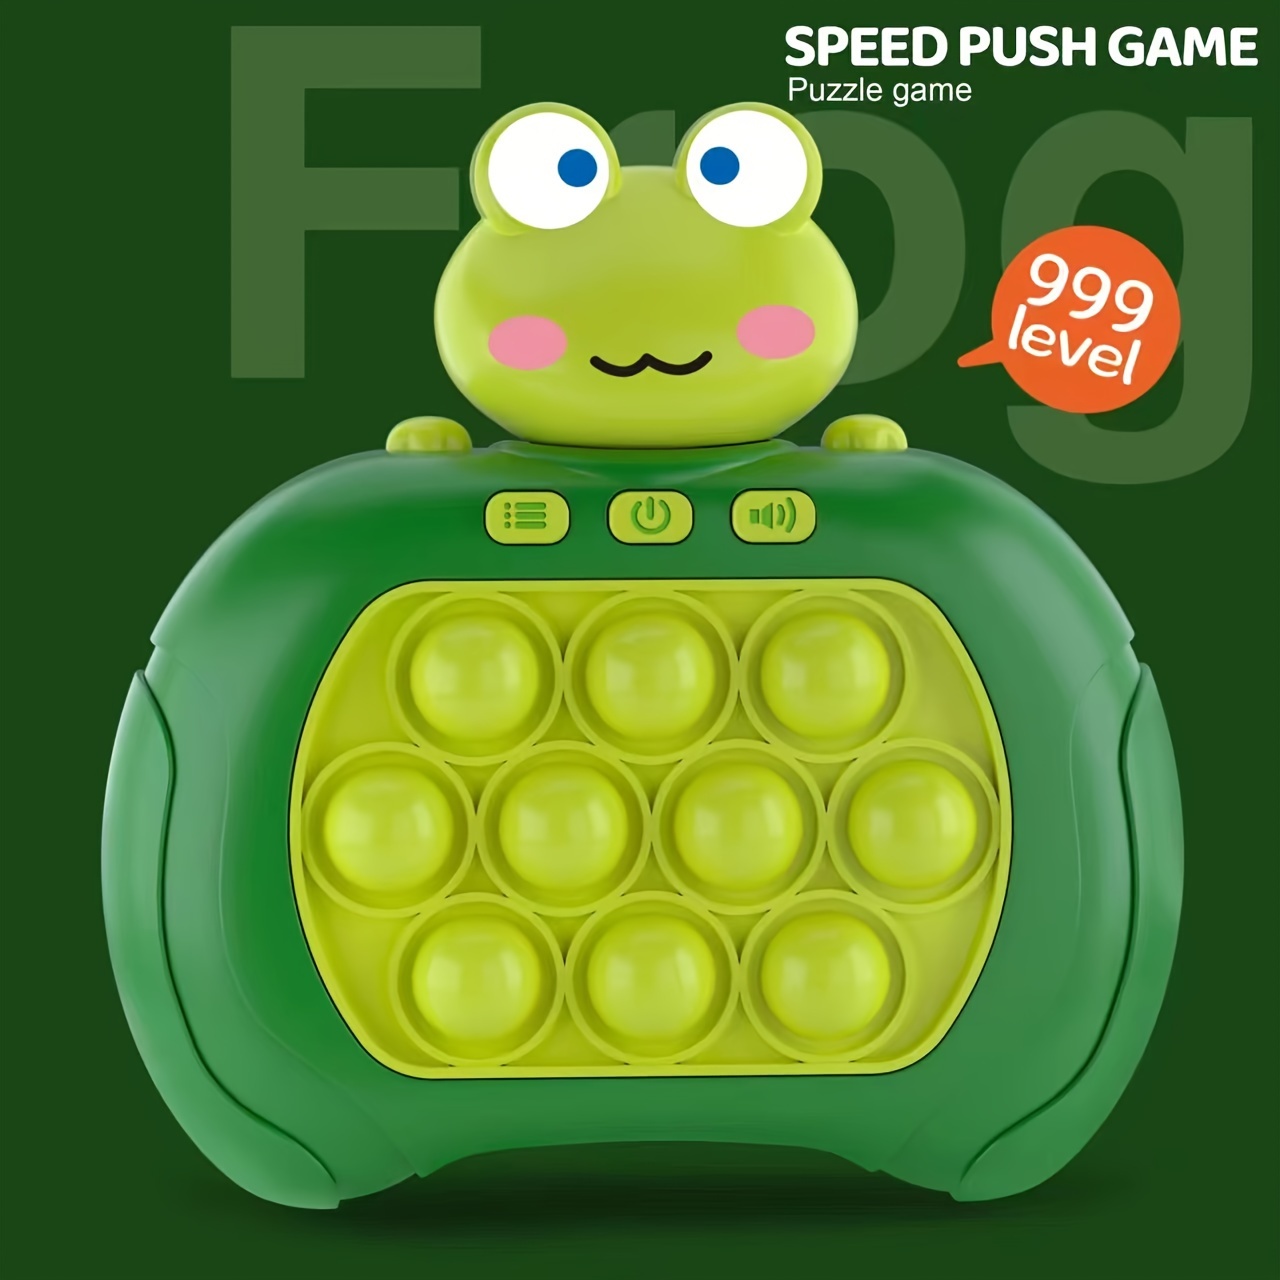 Quick Push Bubble Competitive Game Console Series, Pocket Handheld Games,  Quick Push Game Toys, Children's Breakout Speed Push Game Machine